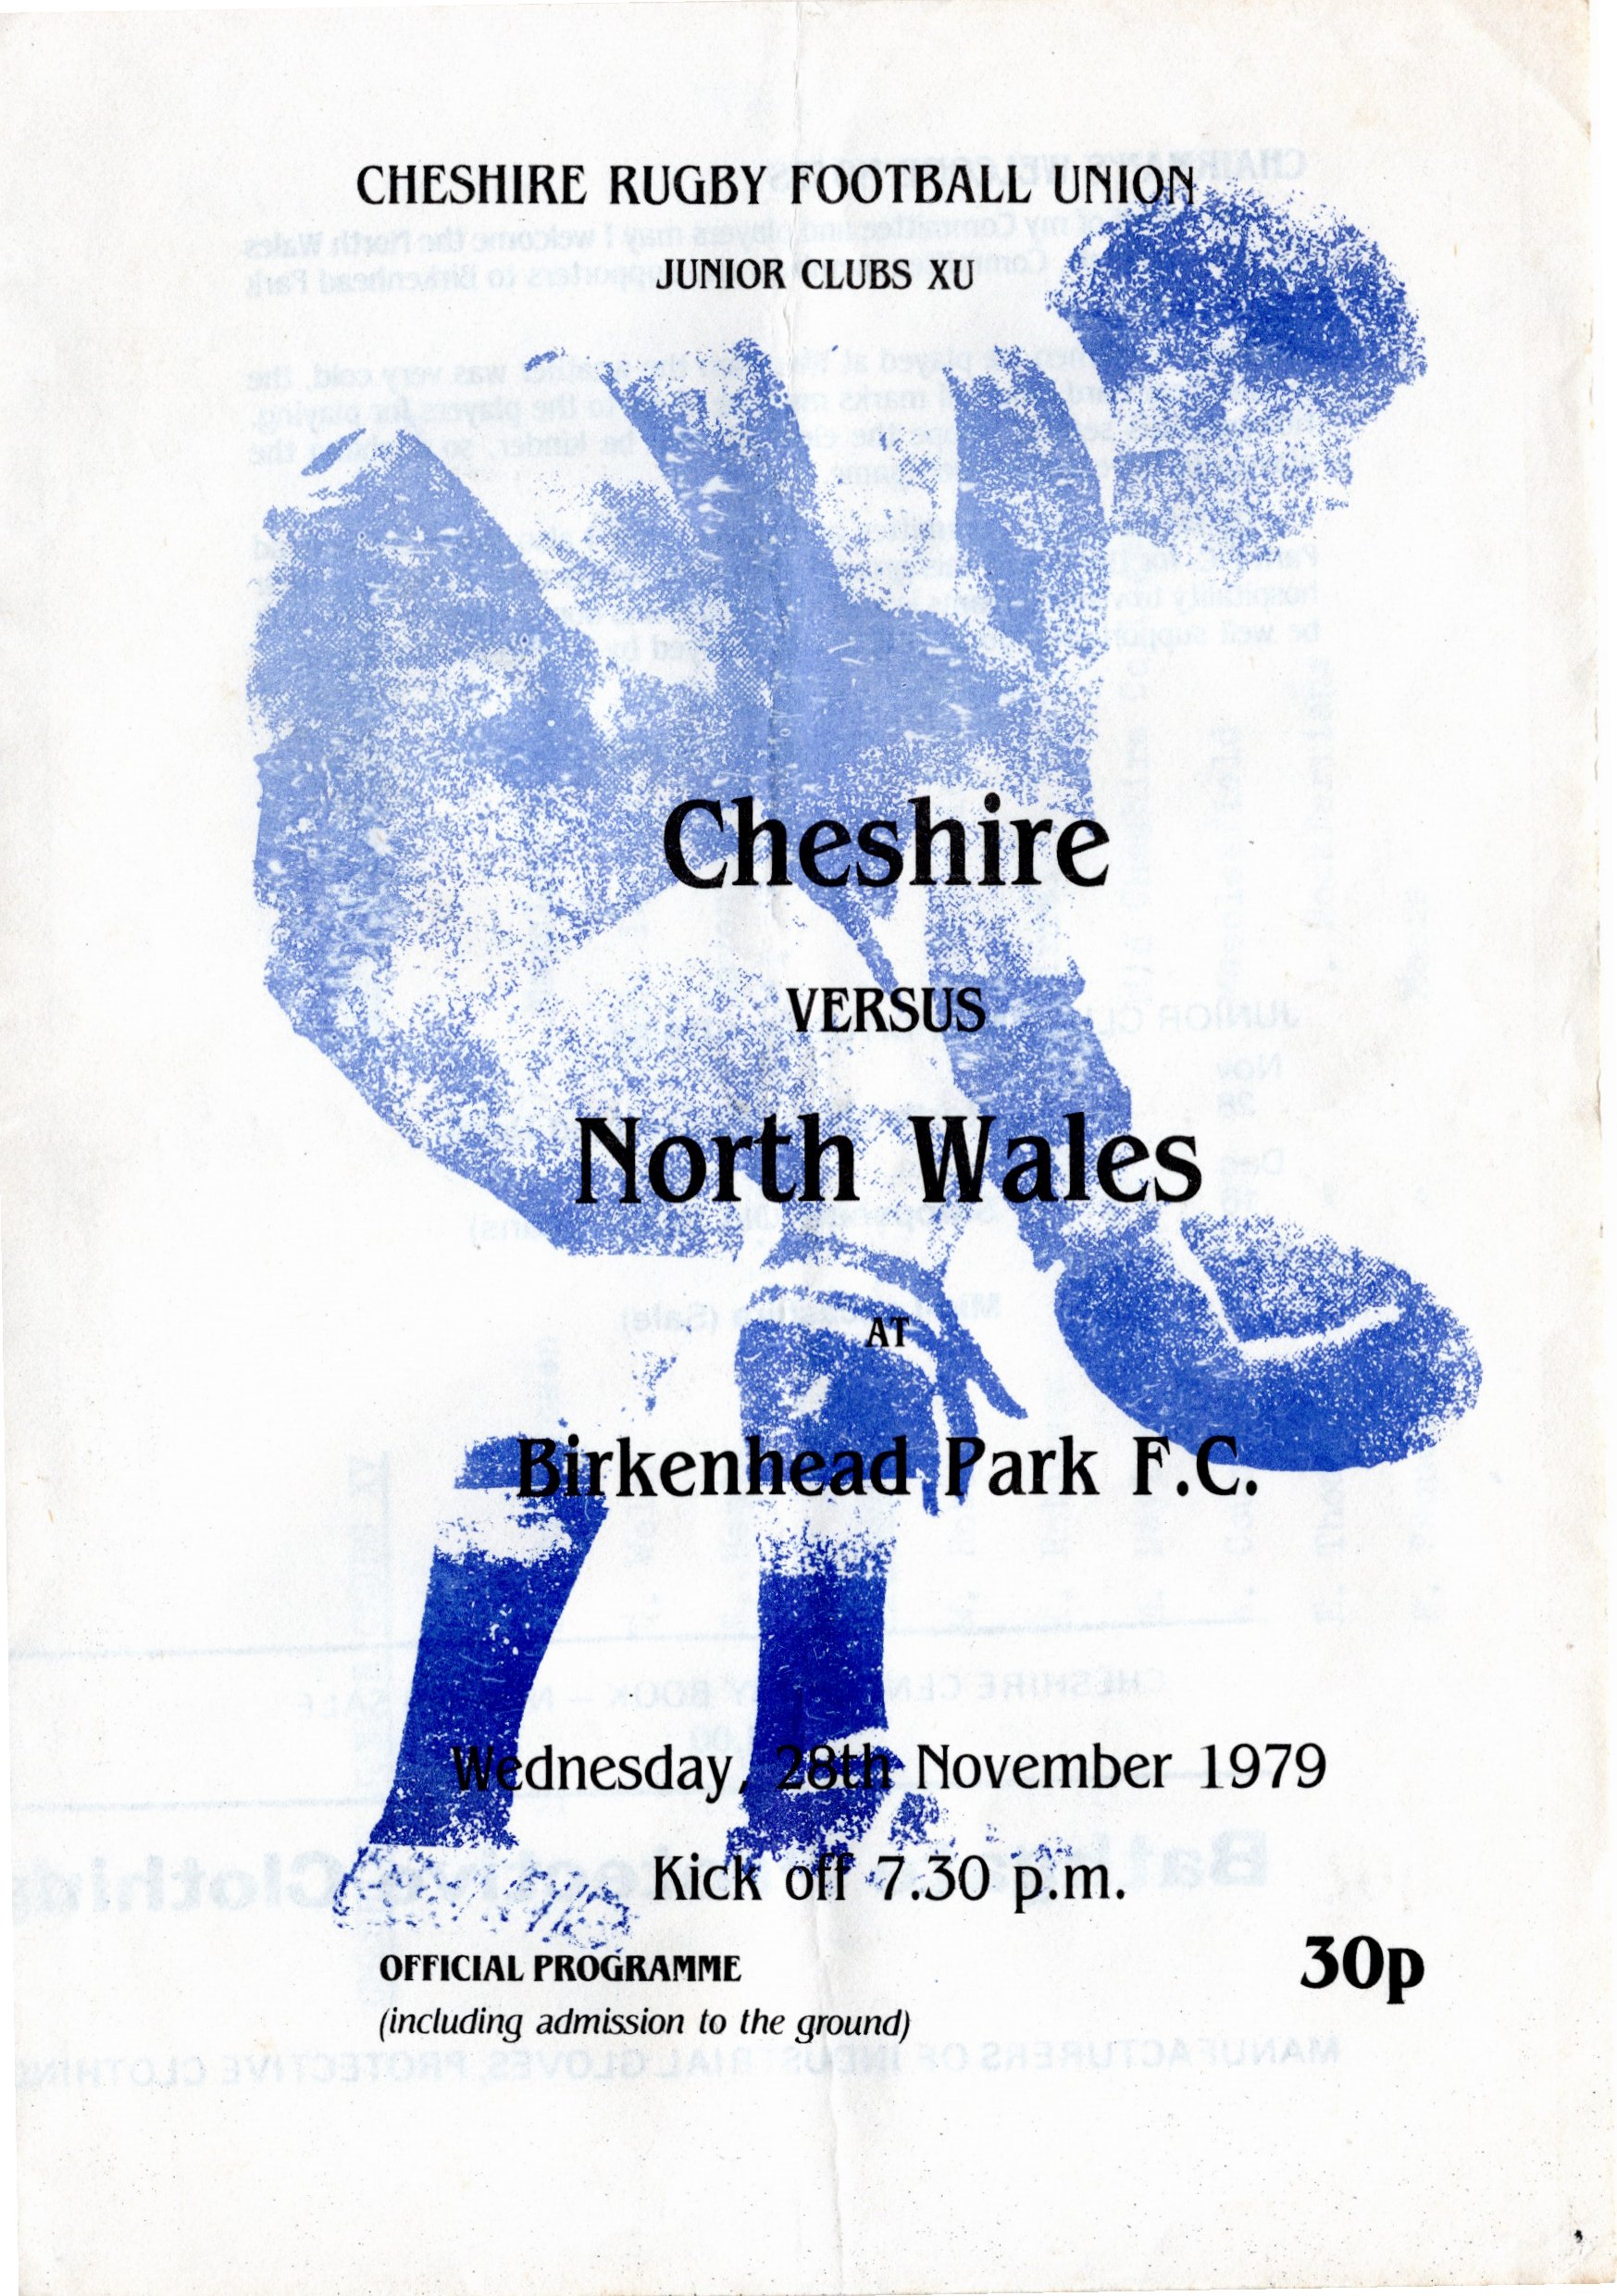 Old Instonians RUFC, 1979 Cheshire v North Wales